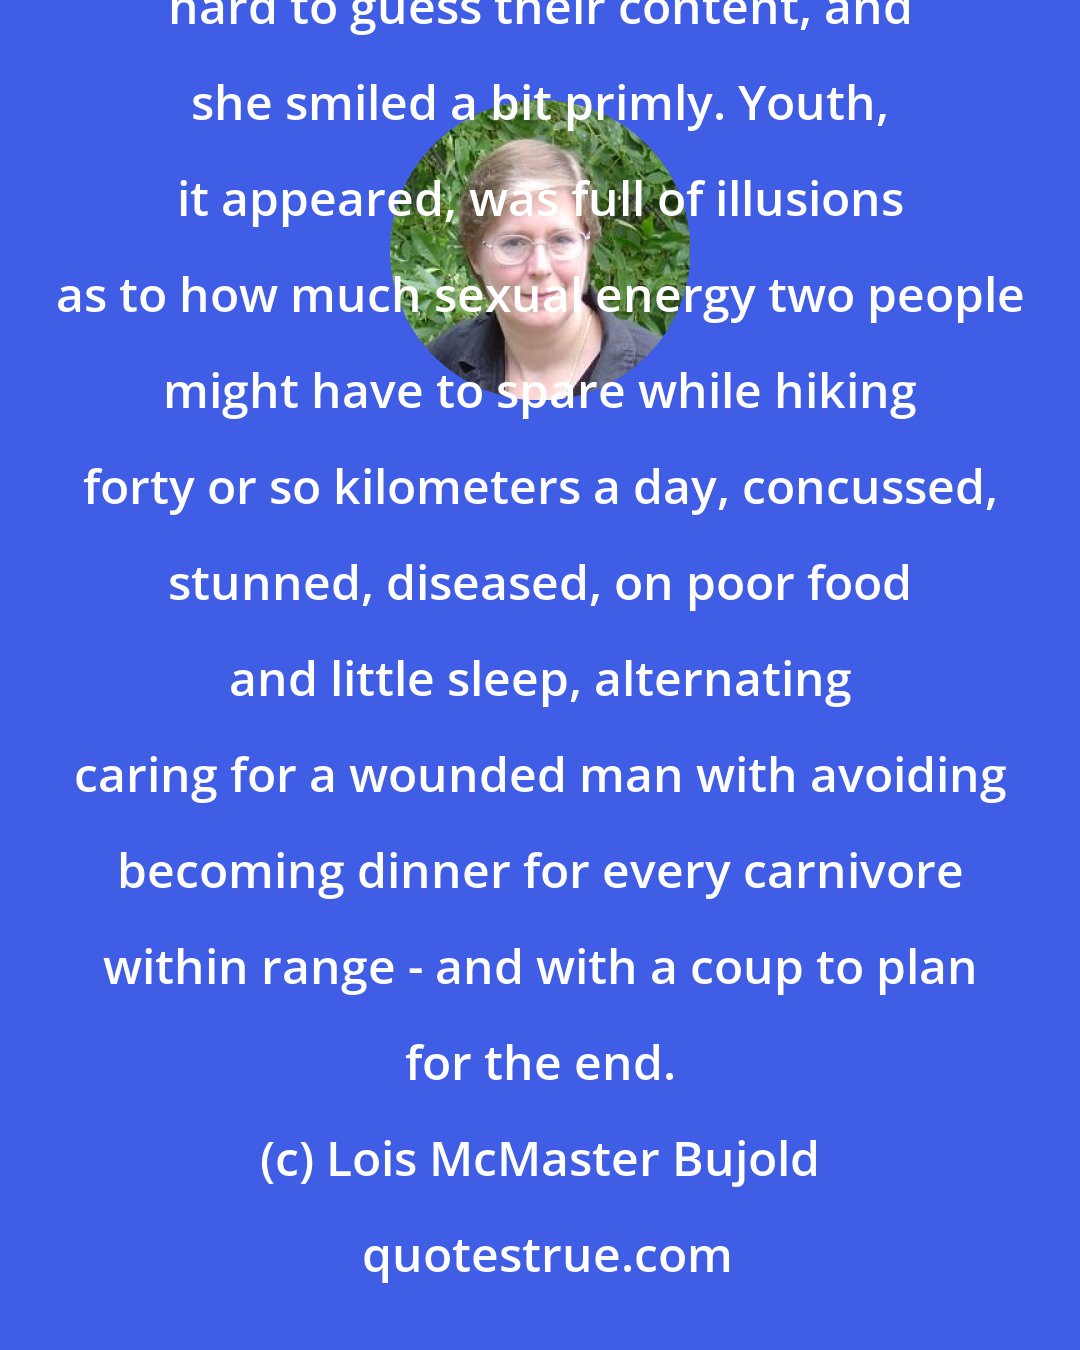 Lois McMaster Bujold: They stared at her curiously, and she caught snatches of conversation in two or three languages. It wasn't hard to guess their content, and she smiled a bit primly. Youth, it appeared, was full of illusions as to how much sexual energy two people might have to spare while hiking forty or so kilometers a day, concussed, stunned, diseased, on poor food and little sleep, alternating caring for a wounded man with avoiding becoming dinner for every carnivore within range - and with a coup to plan for the end.